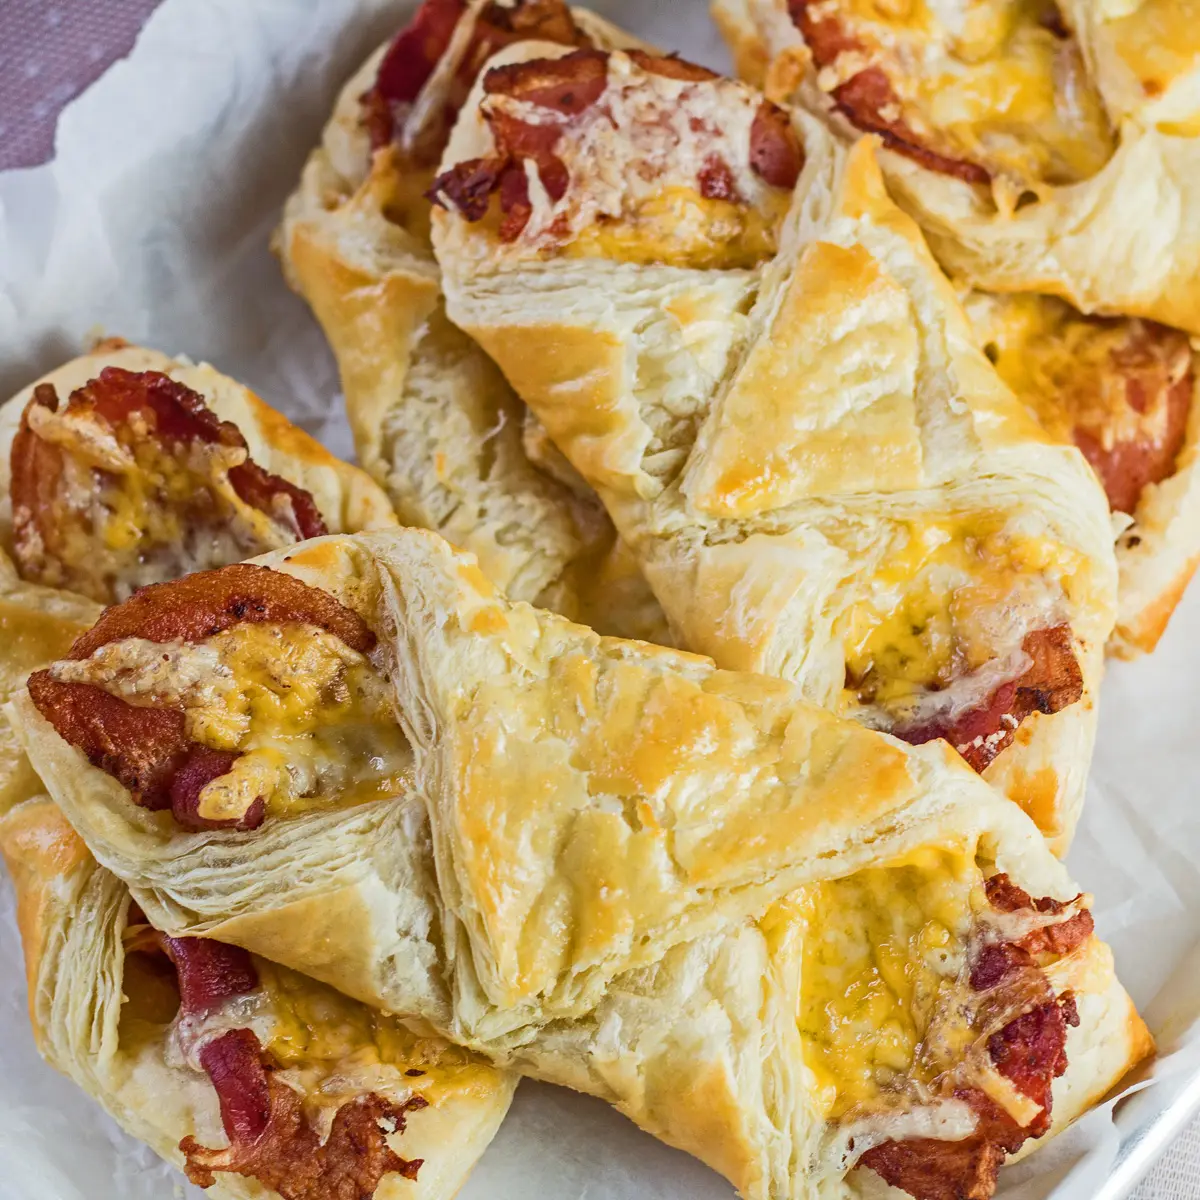 Golden cheese and bacon turnovers on serving tray.